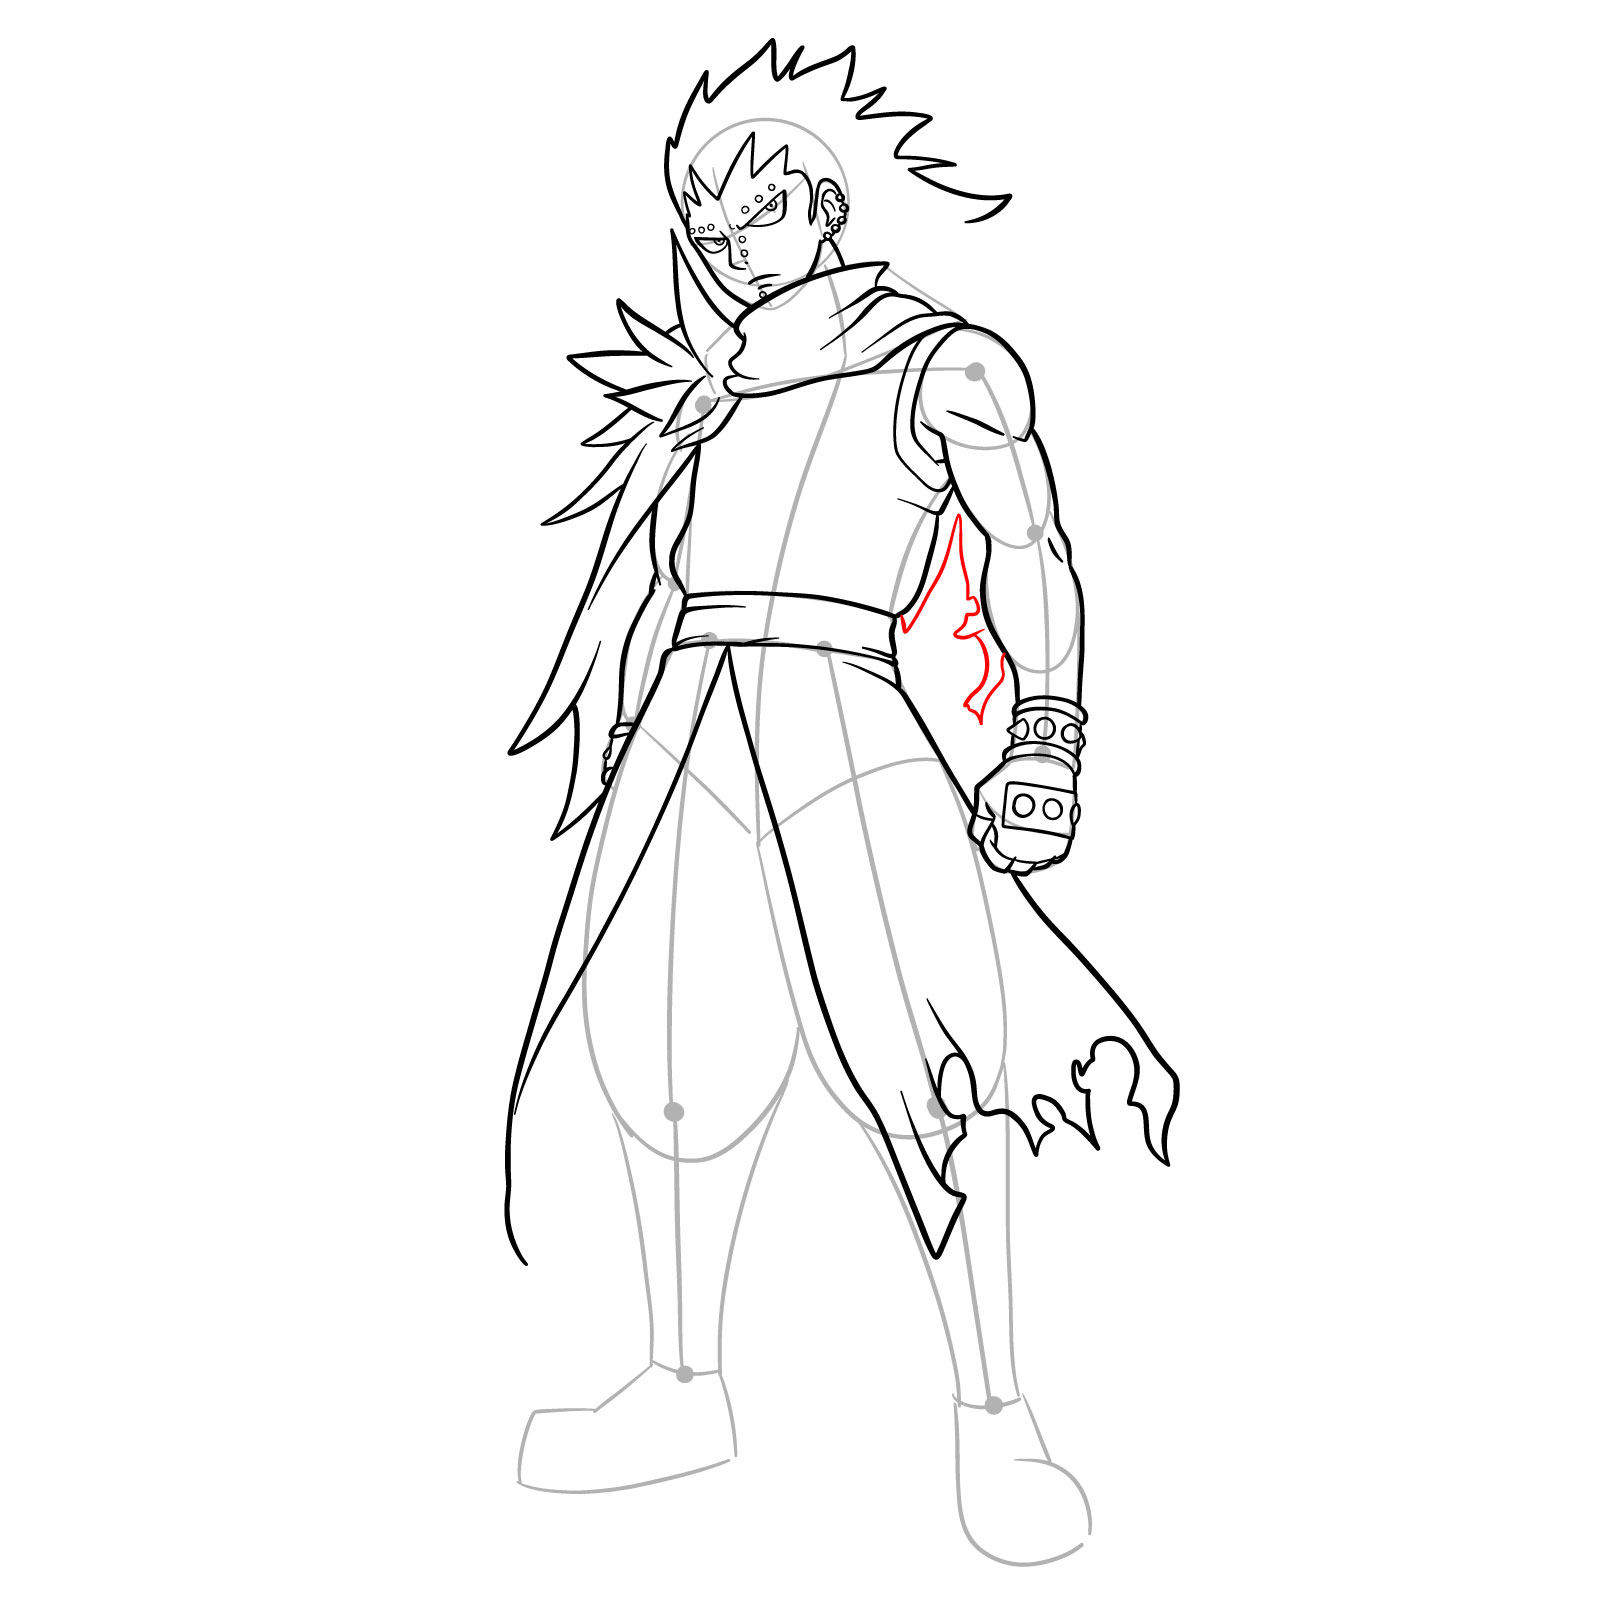 How to draw Gajeel Redfox from Fairy Tail - step 29